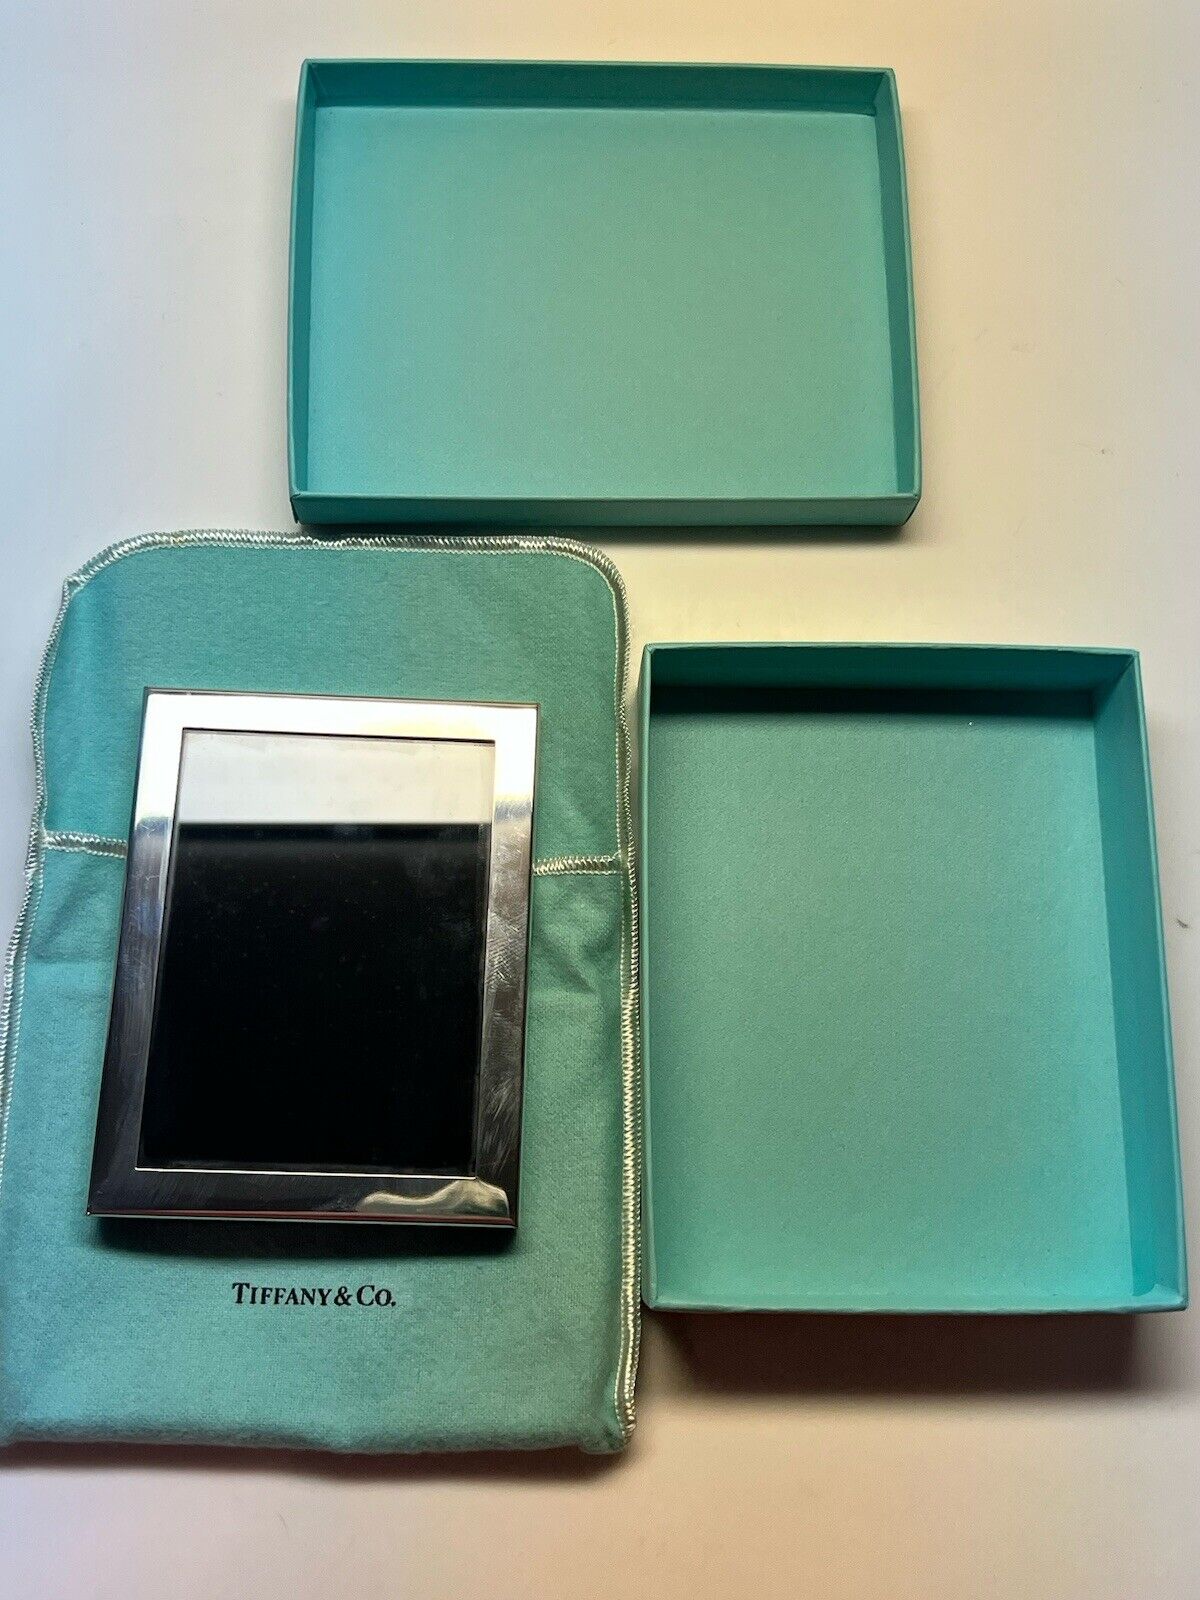 Tiffany & Co. 3x4 Pewter Picture Frame Glass Metal Dust Bag Box BRAND NEW